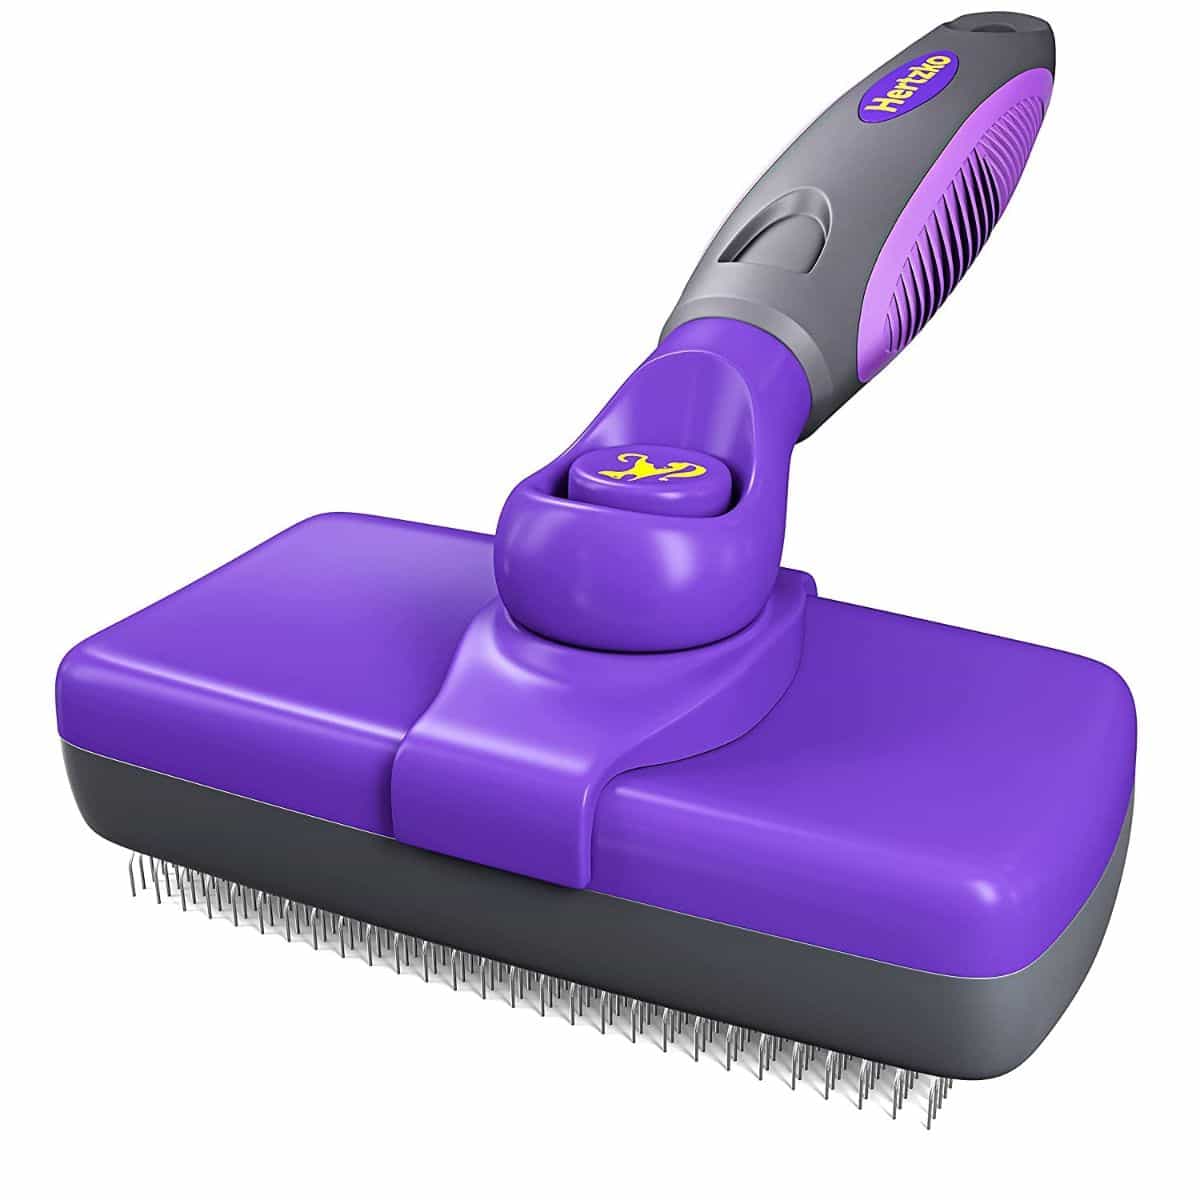 A Self-Cleaning Hair Brush